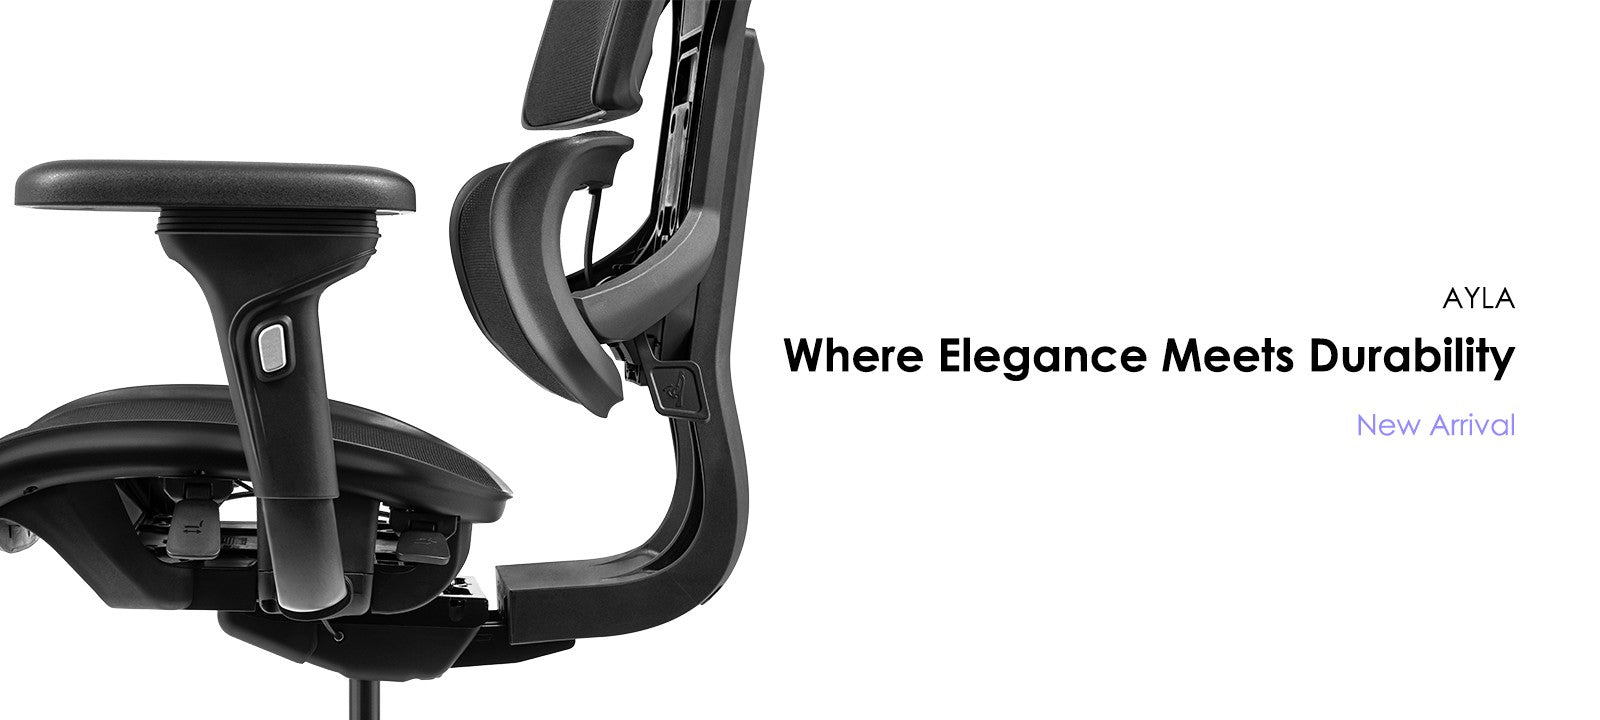 Side view of Ayla ergonomic chair focusing on design and structure with 'Where Elegance Meets Durability' slogan.